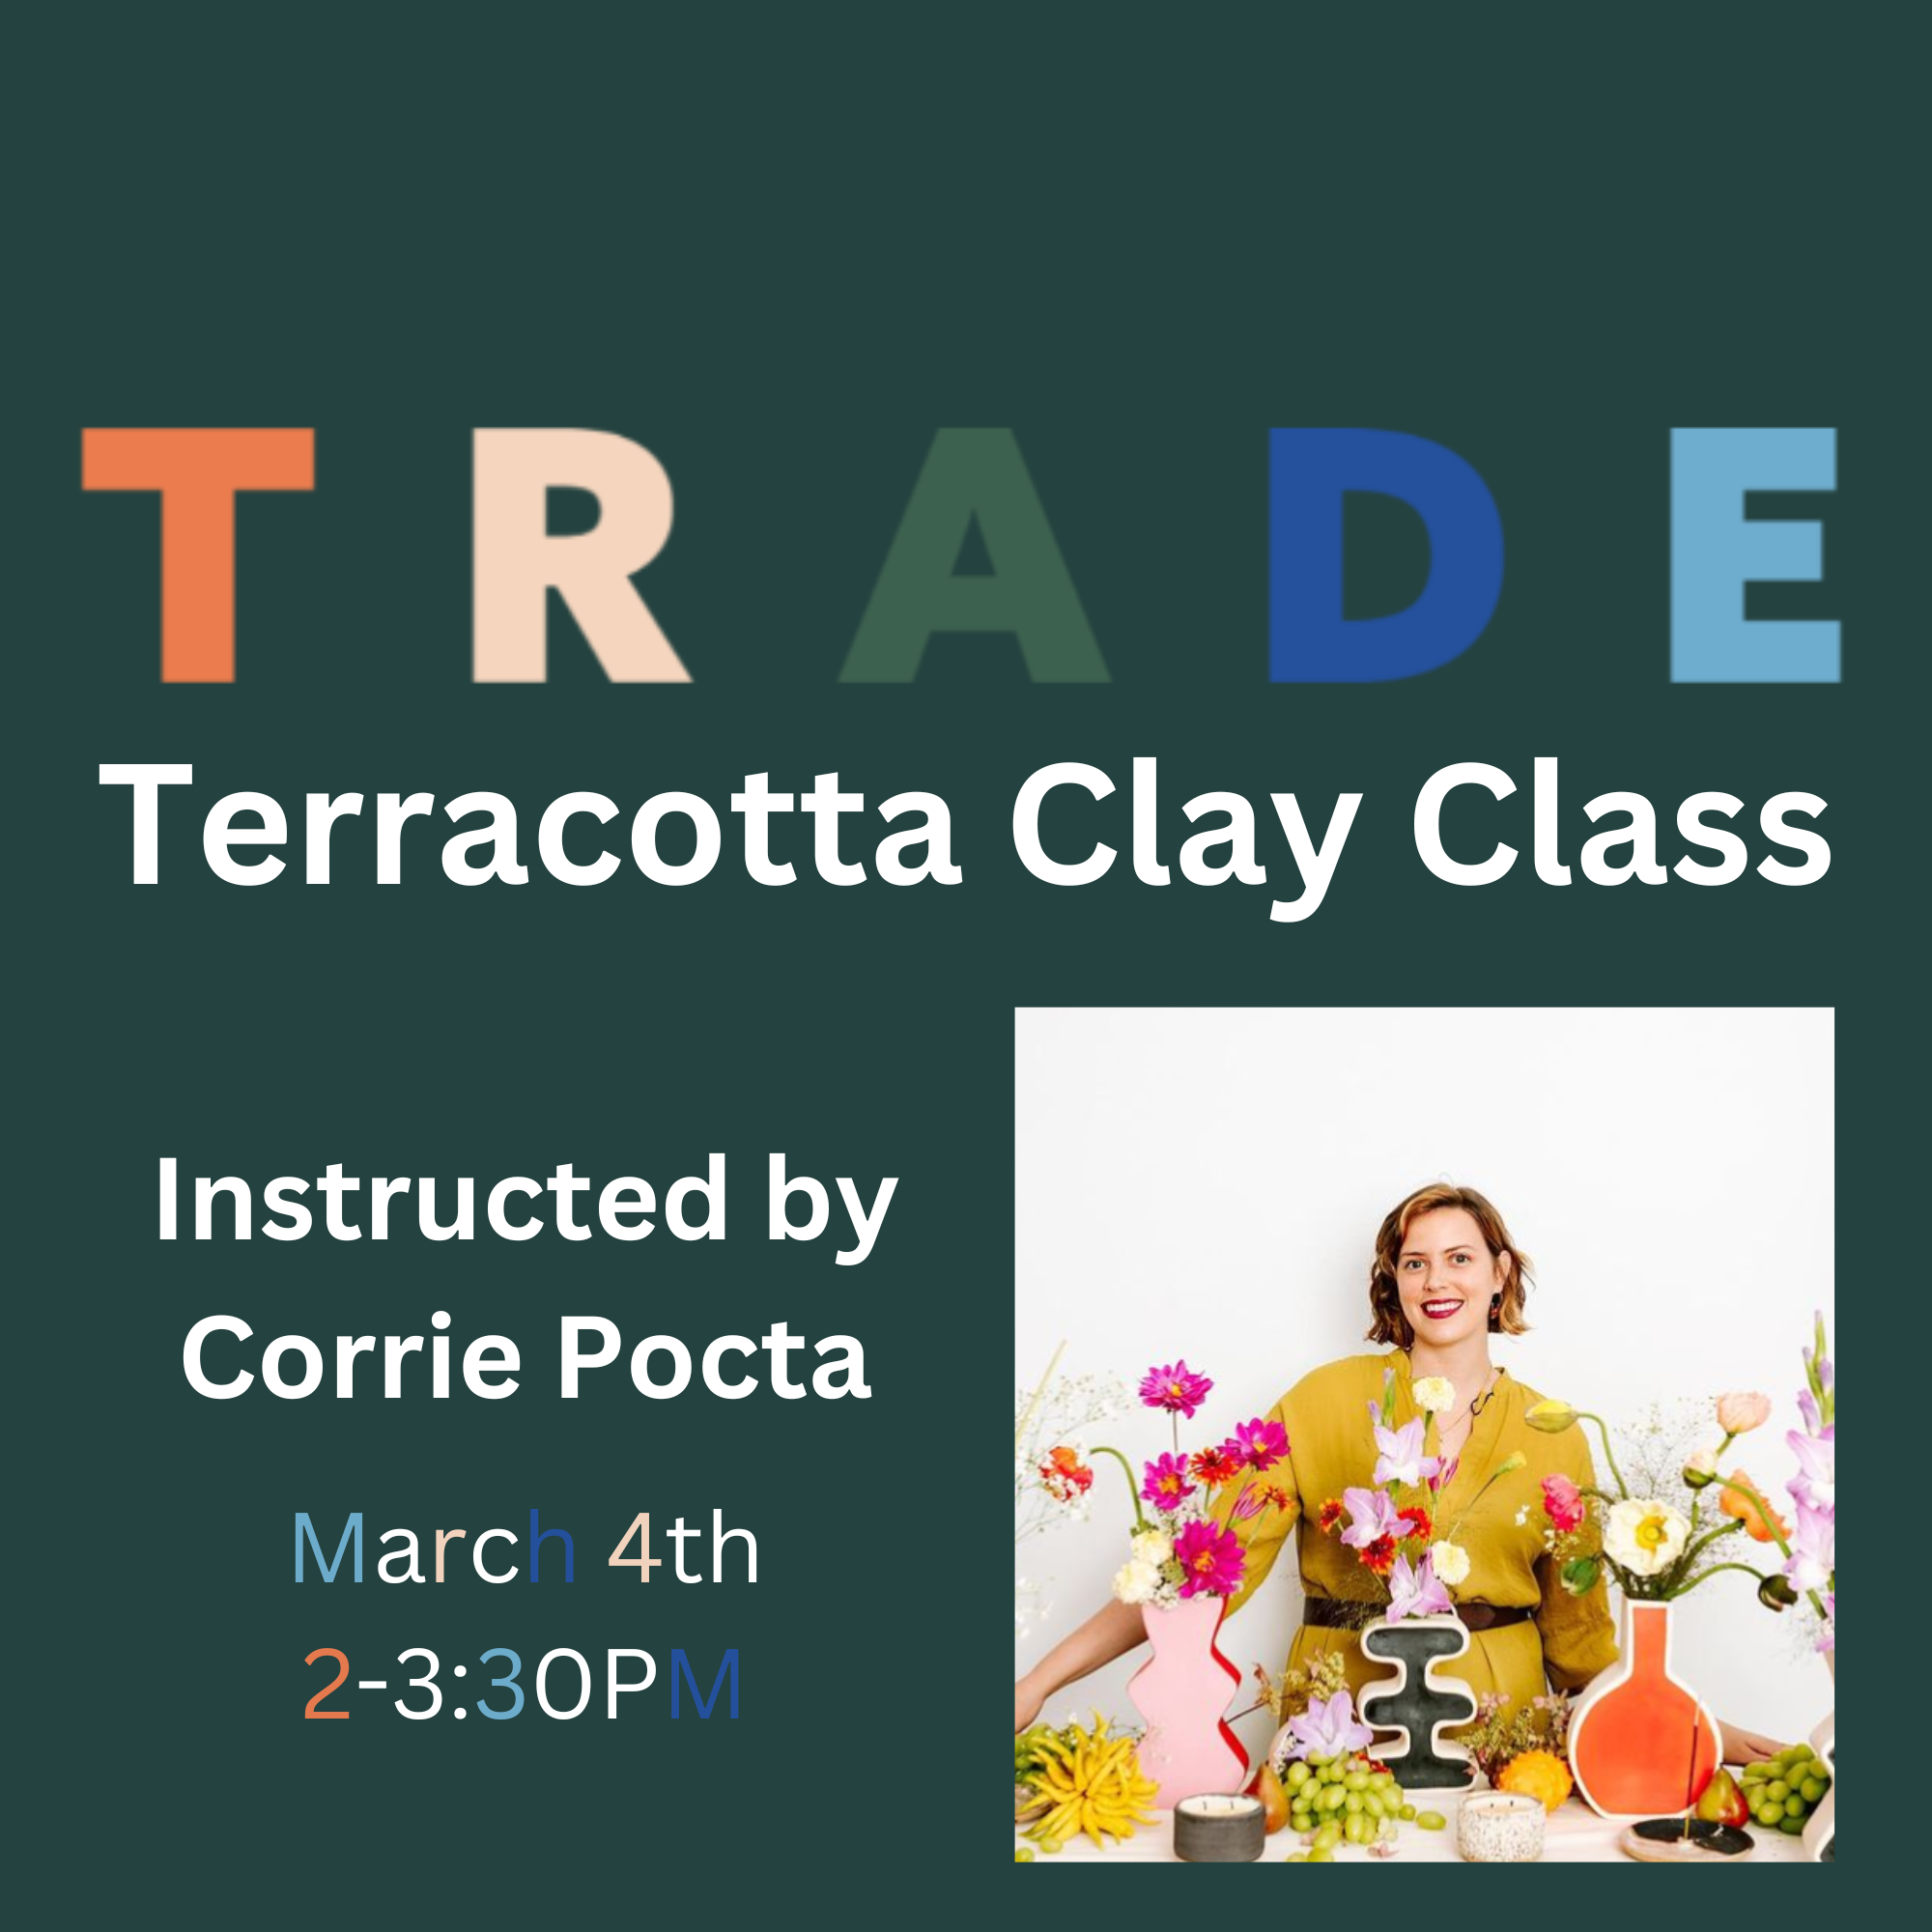 TRADE Terracotta Clay Class featuring an image of the instructor Corrie Pocta